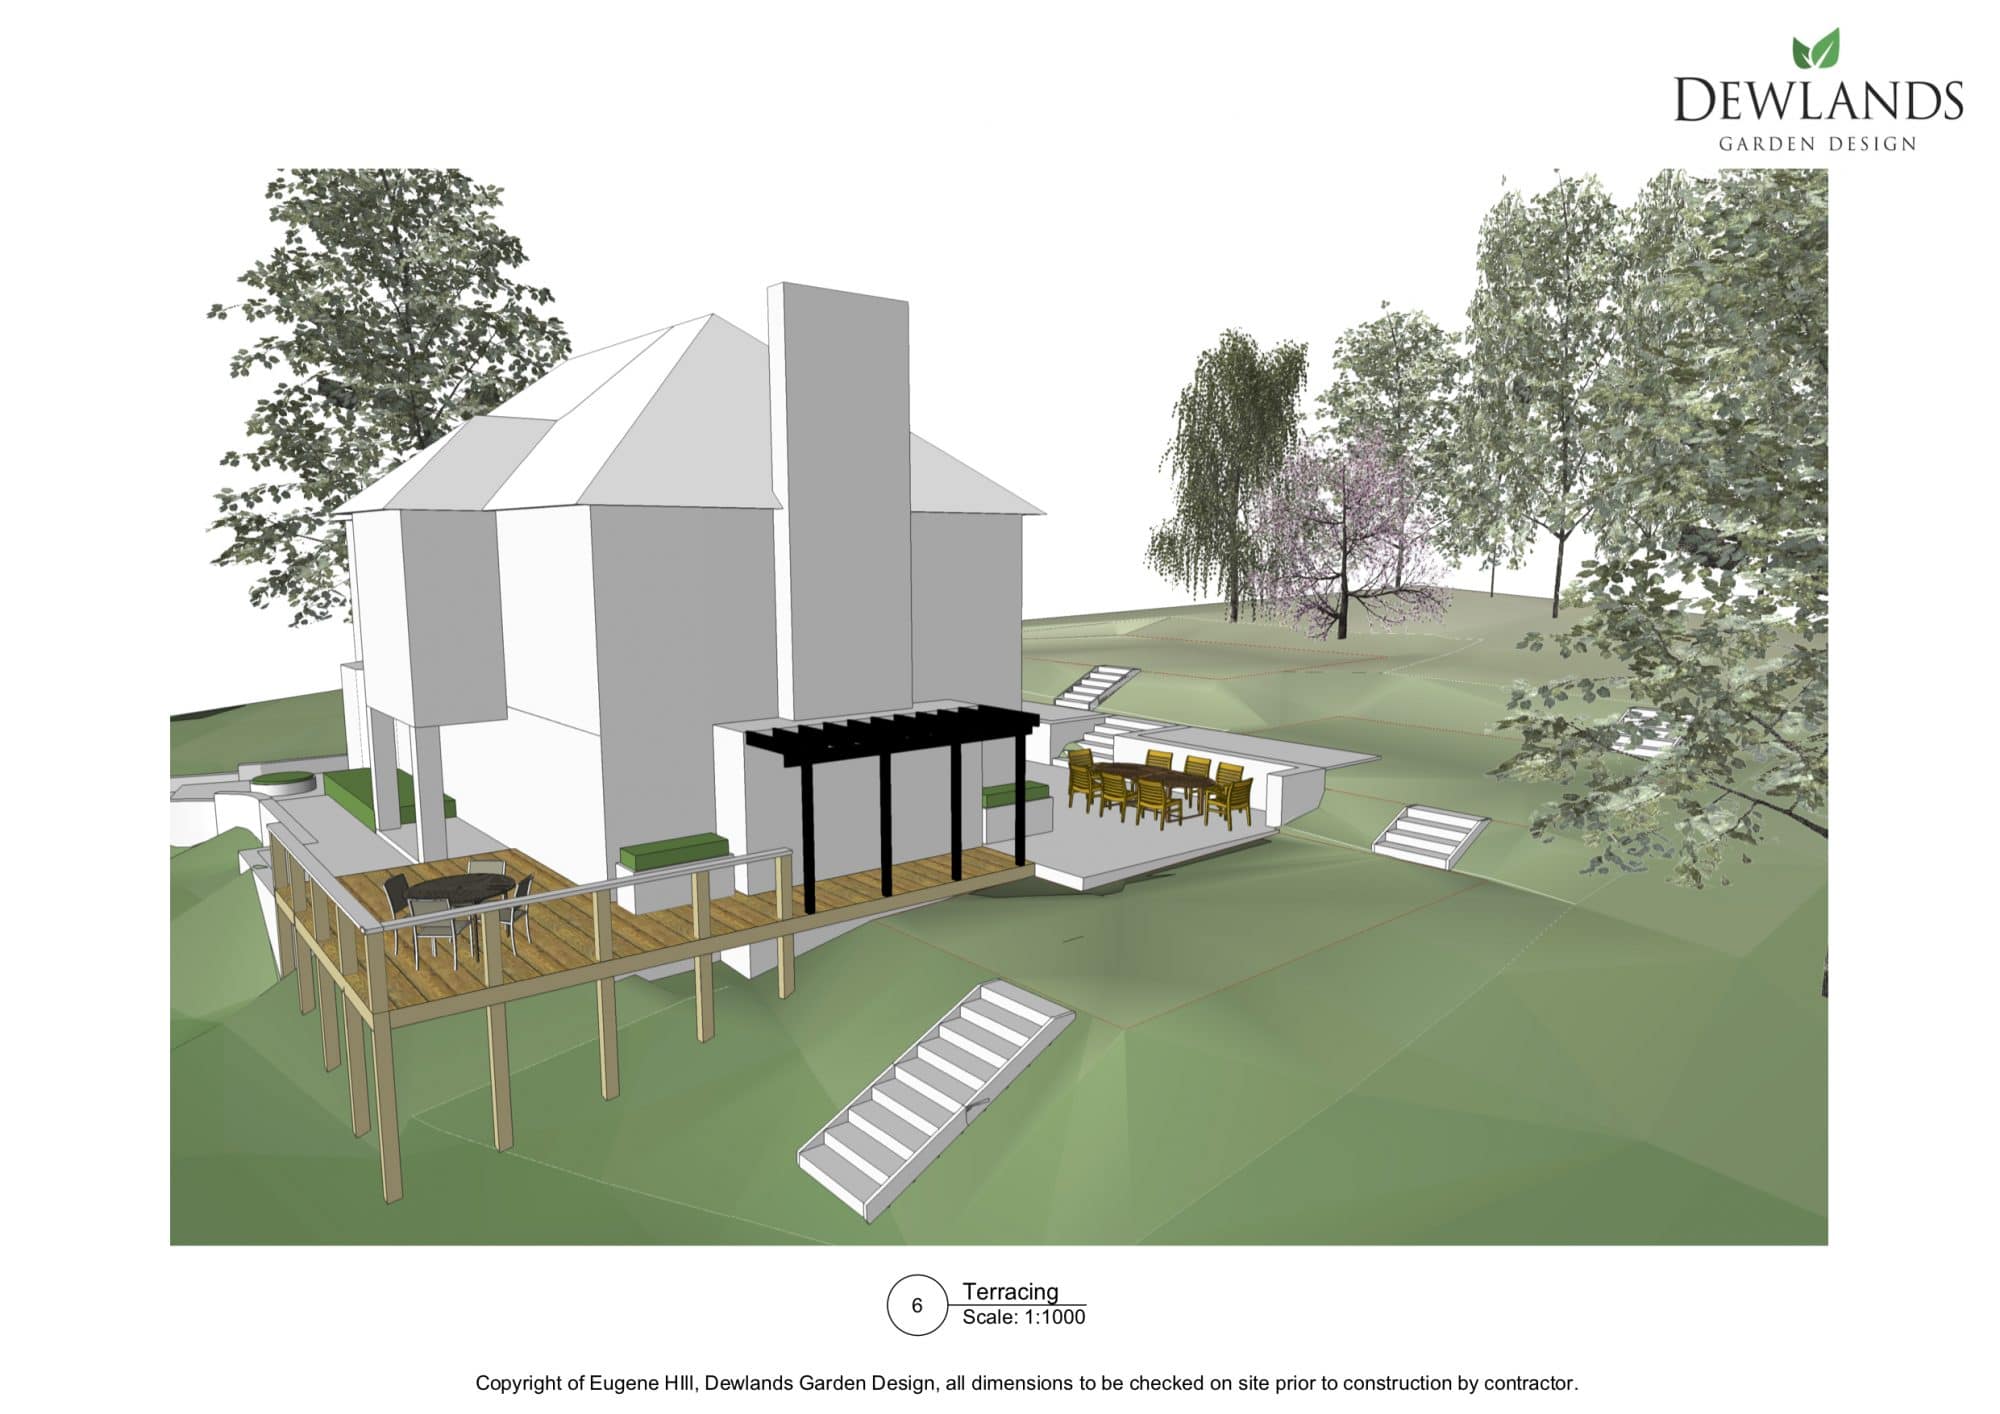 3D model which includes the shape of the land, the house and other key features garden design tricks Kent Sussex Surrey